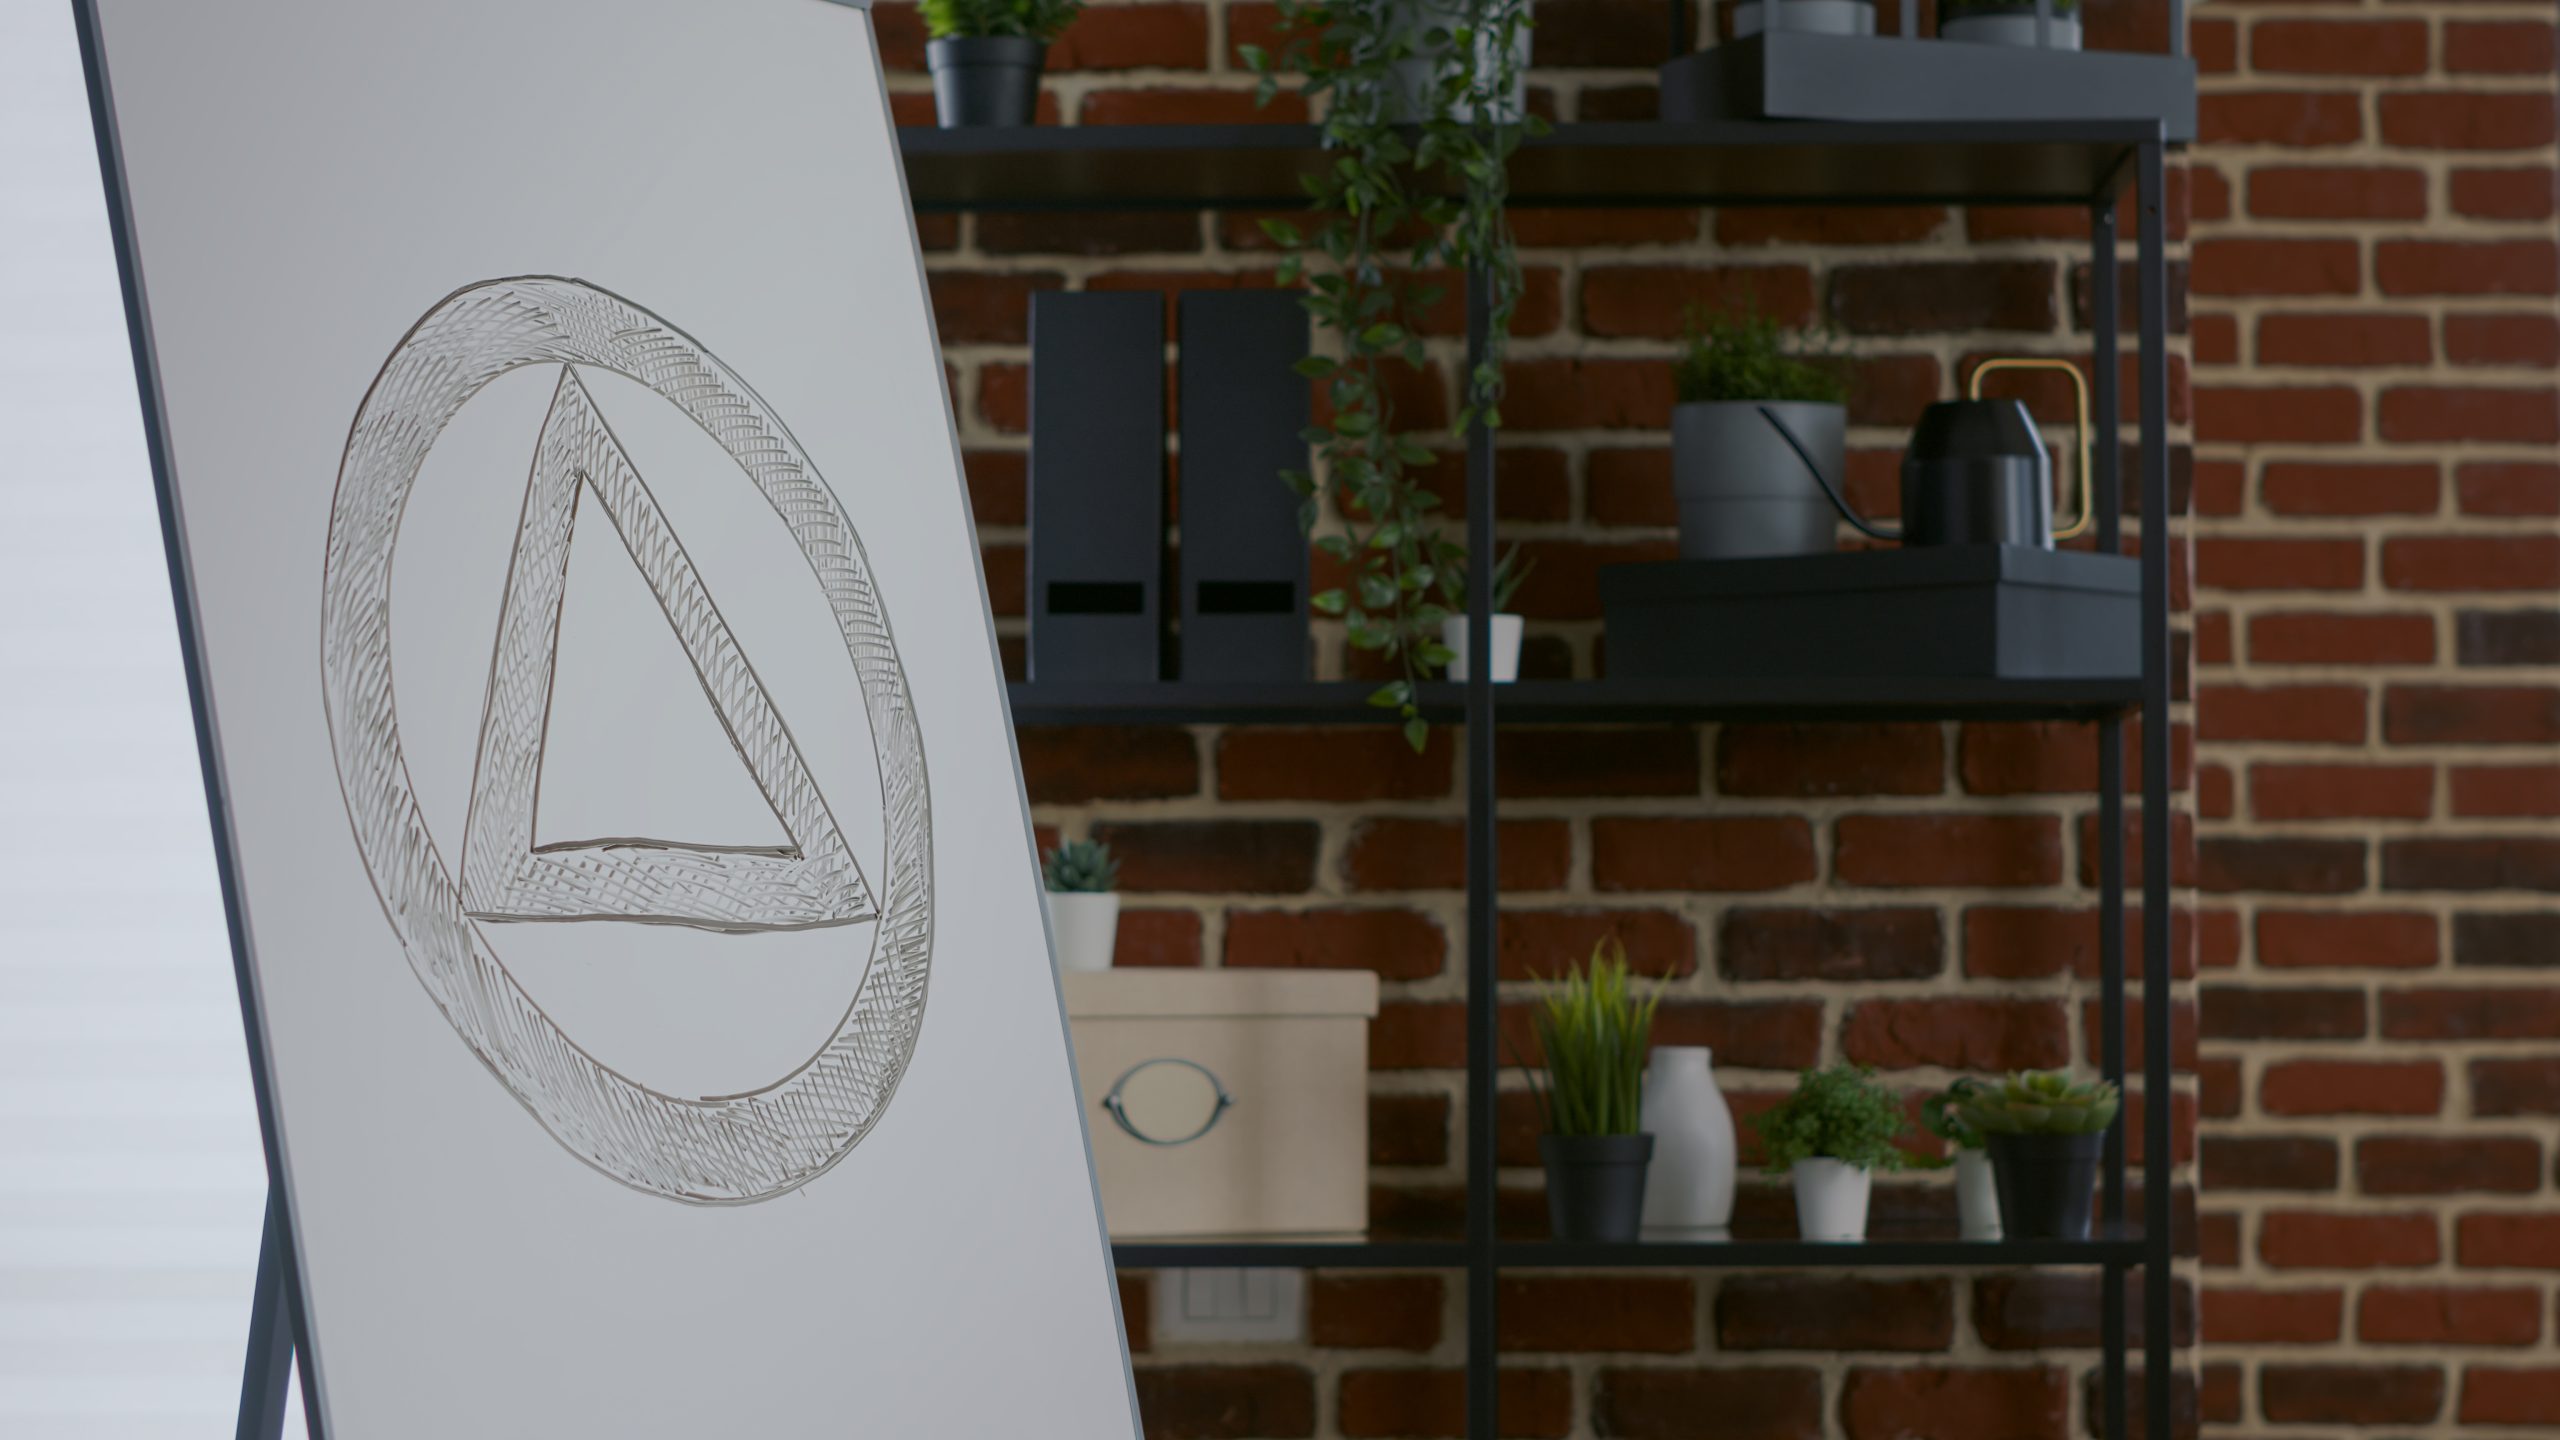 AA Triangle on easel in typical meeting room